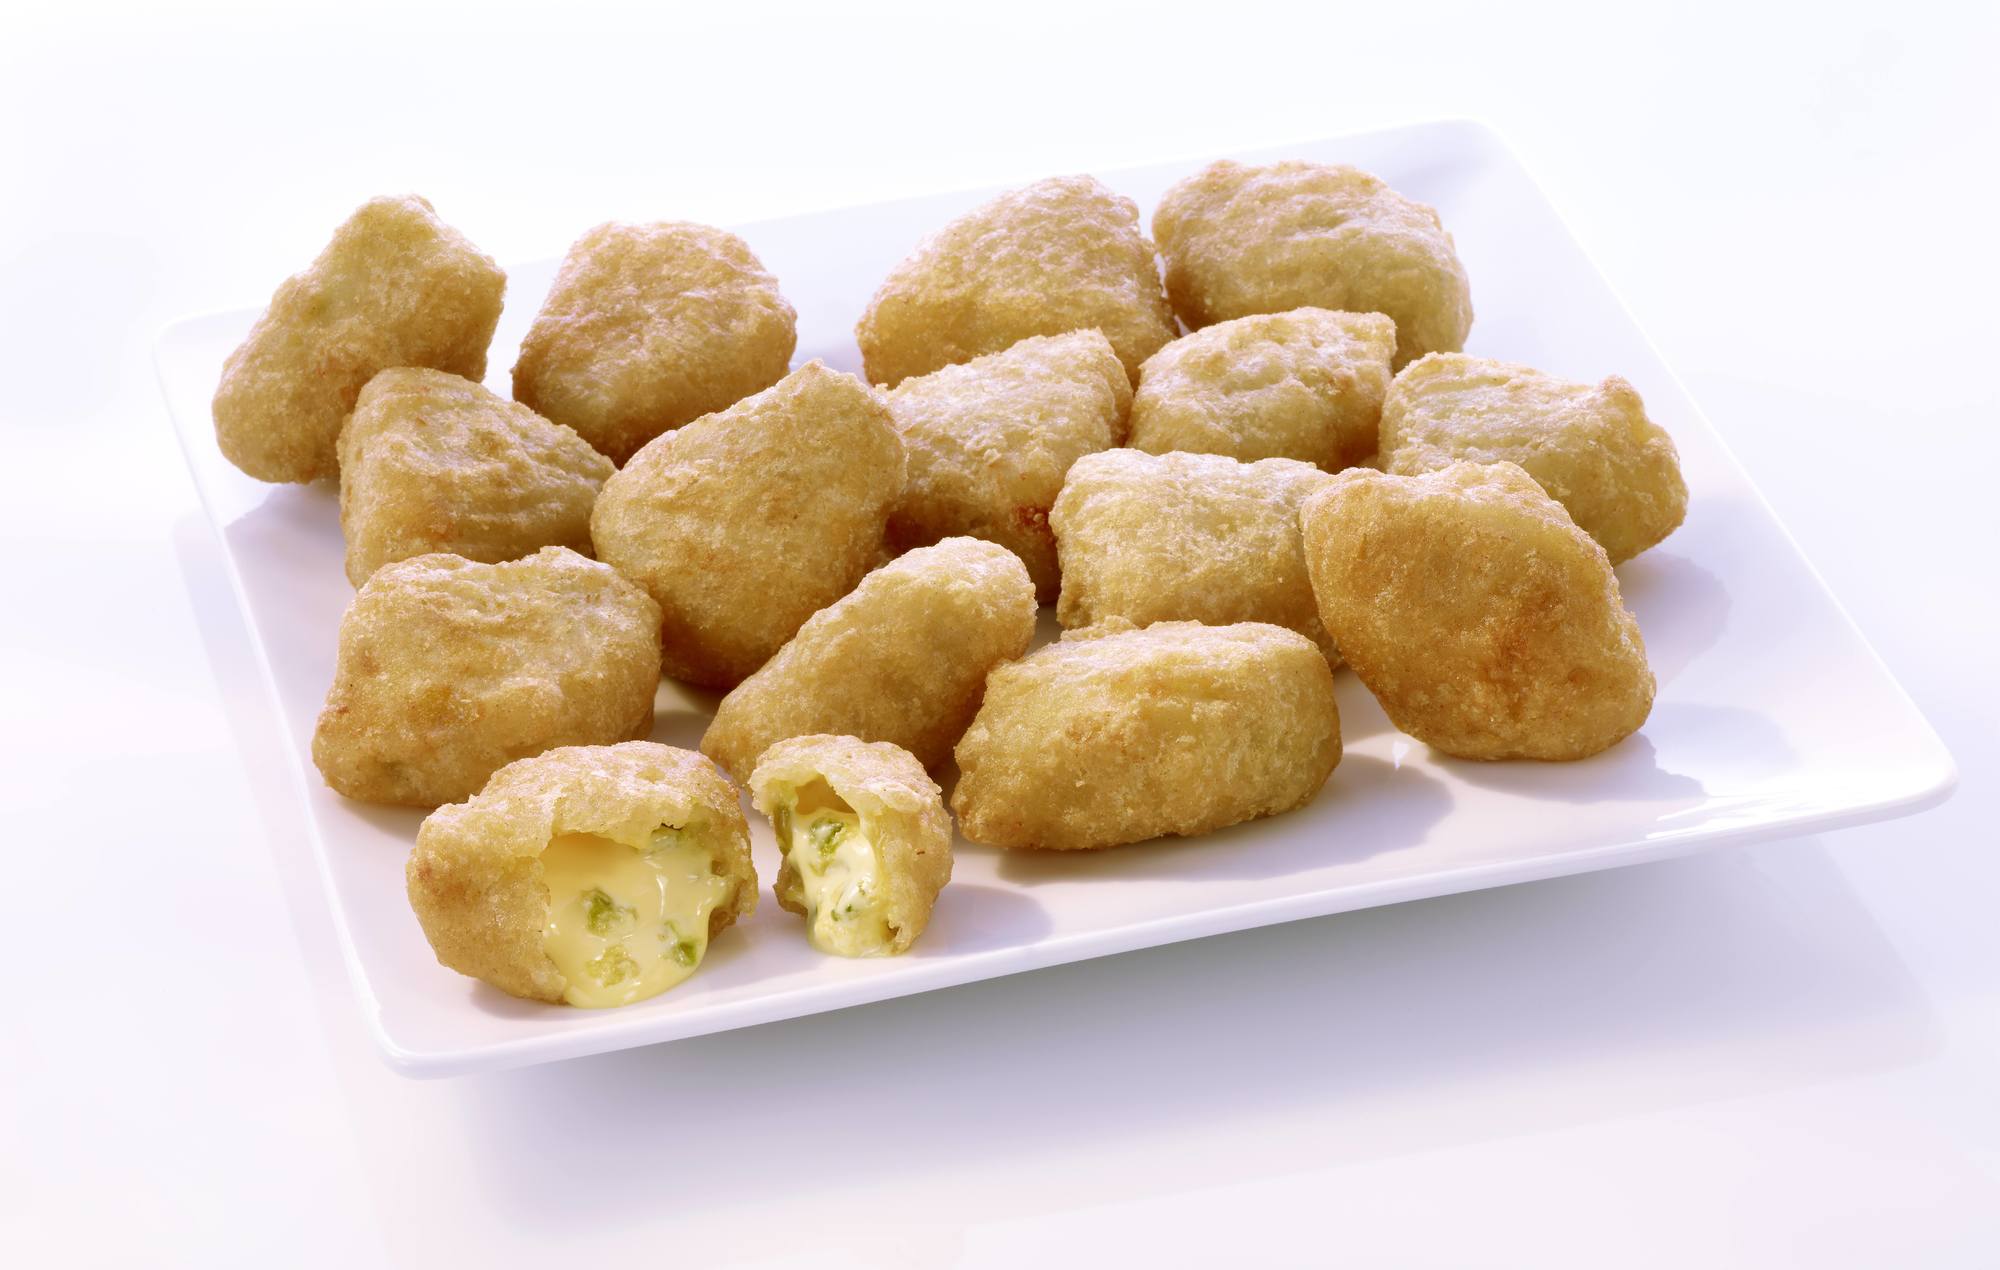 Chili & Cheese Nuggets 1000g